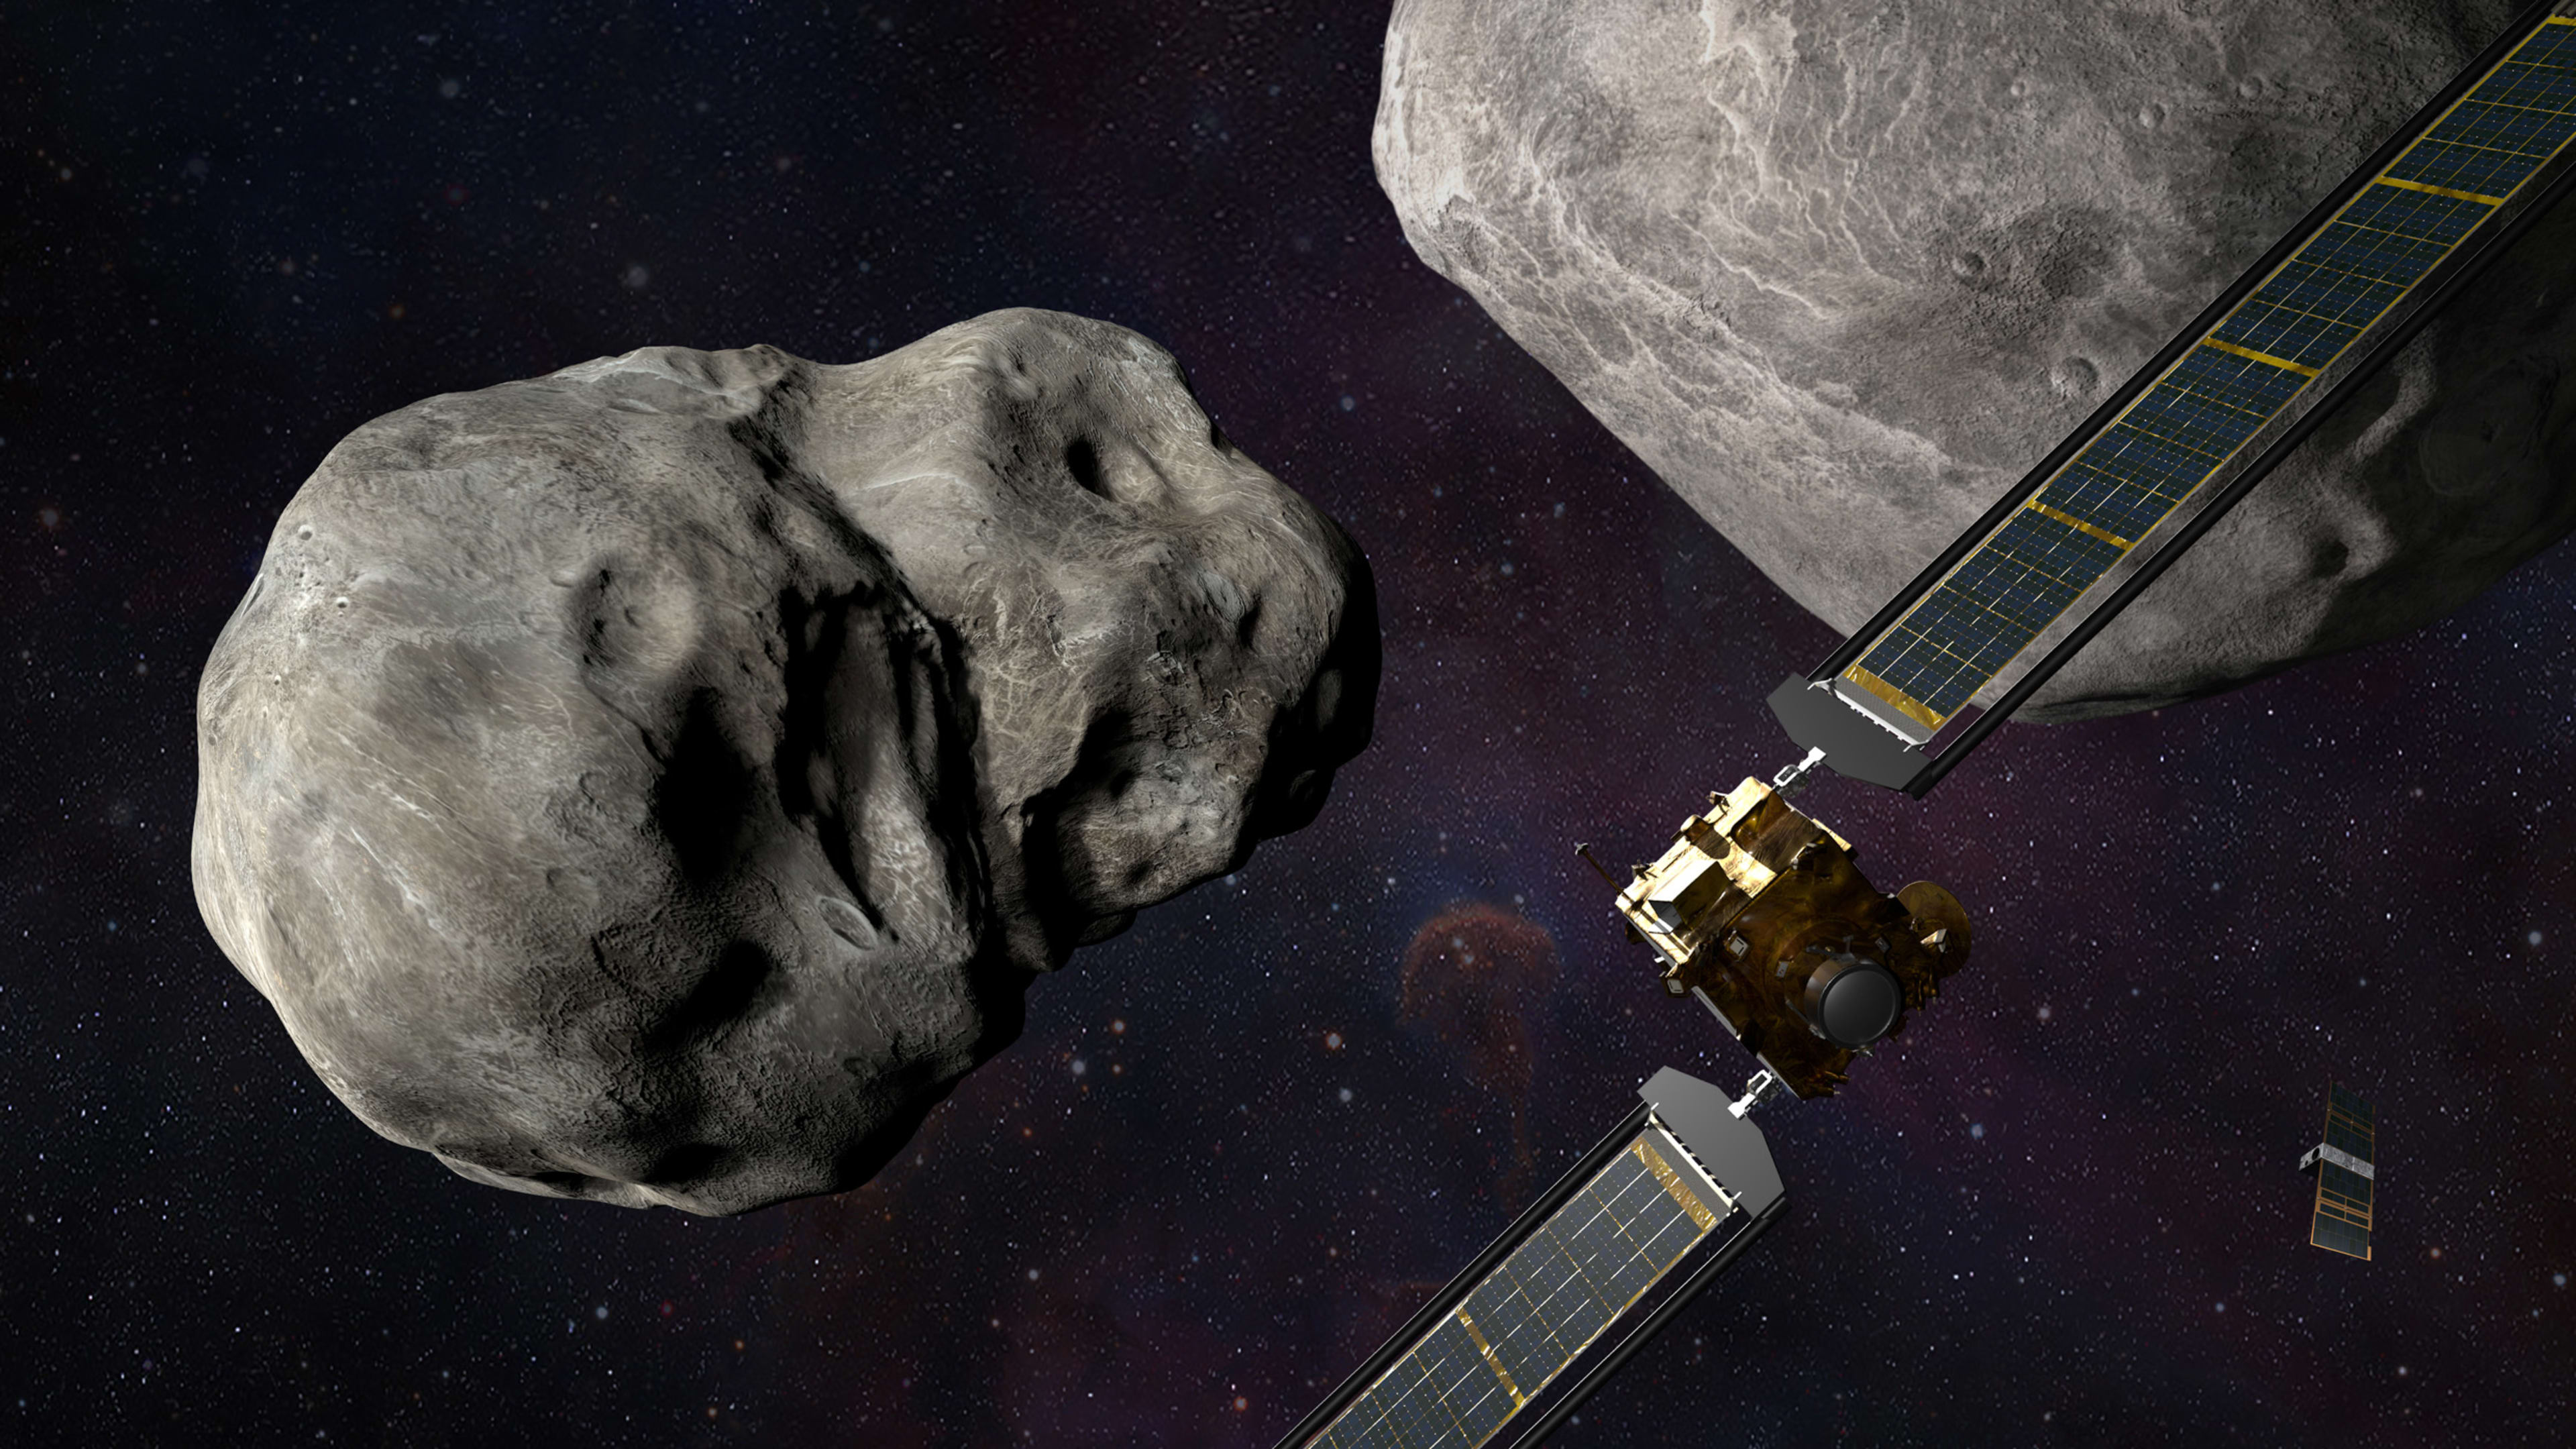 Americans are very concerned about deadly asteroids hitting Earth